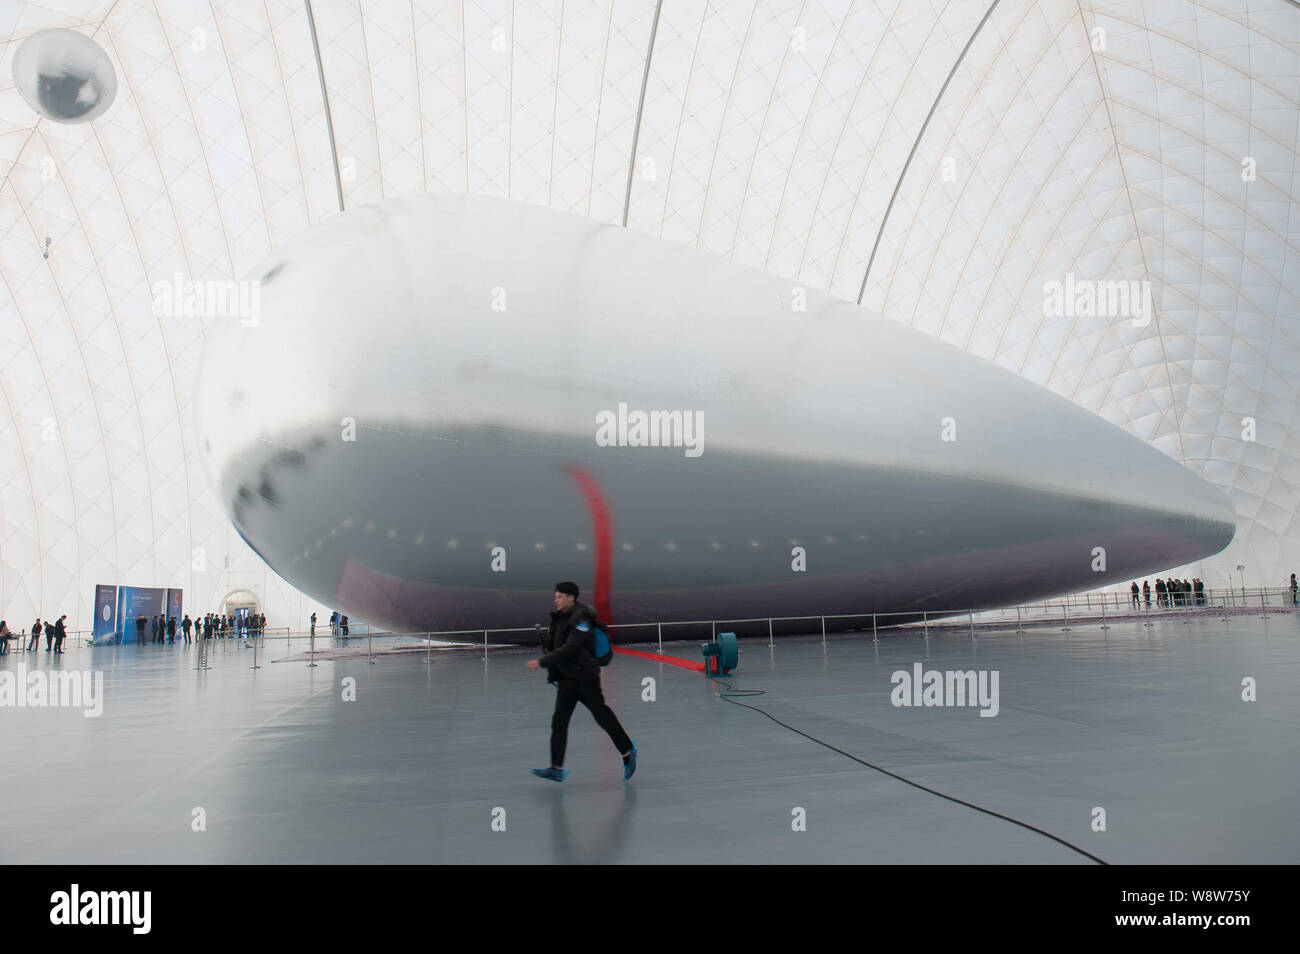 A Visitor Walks Past The Flying Platform Cloud On Display At The Kuang Chi Apollo Base In Shenzhen City South China S Guangdong Province 22 Decemb Stock Photo Alamy